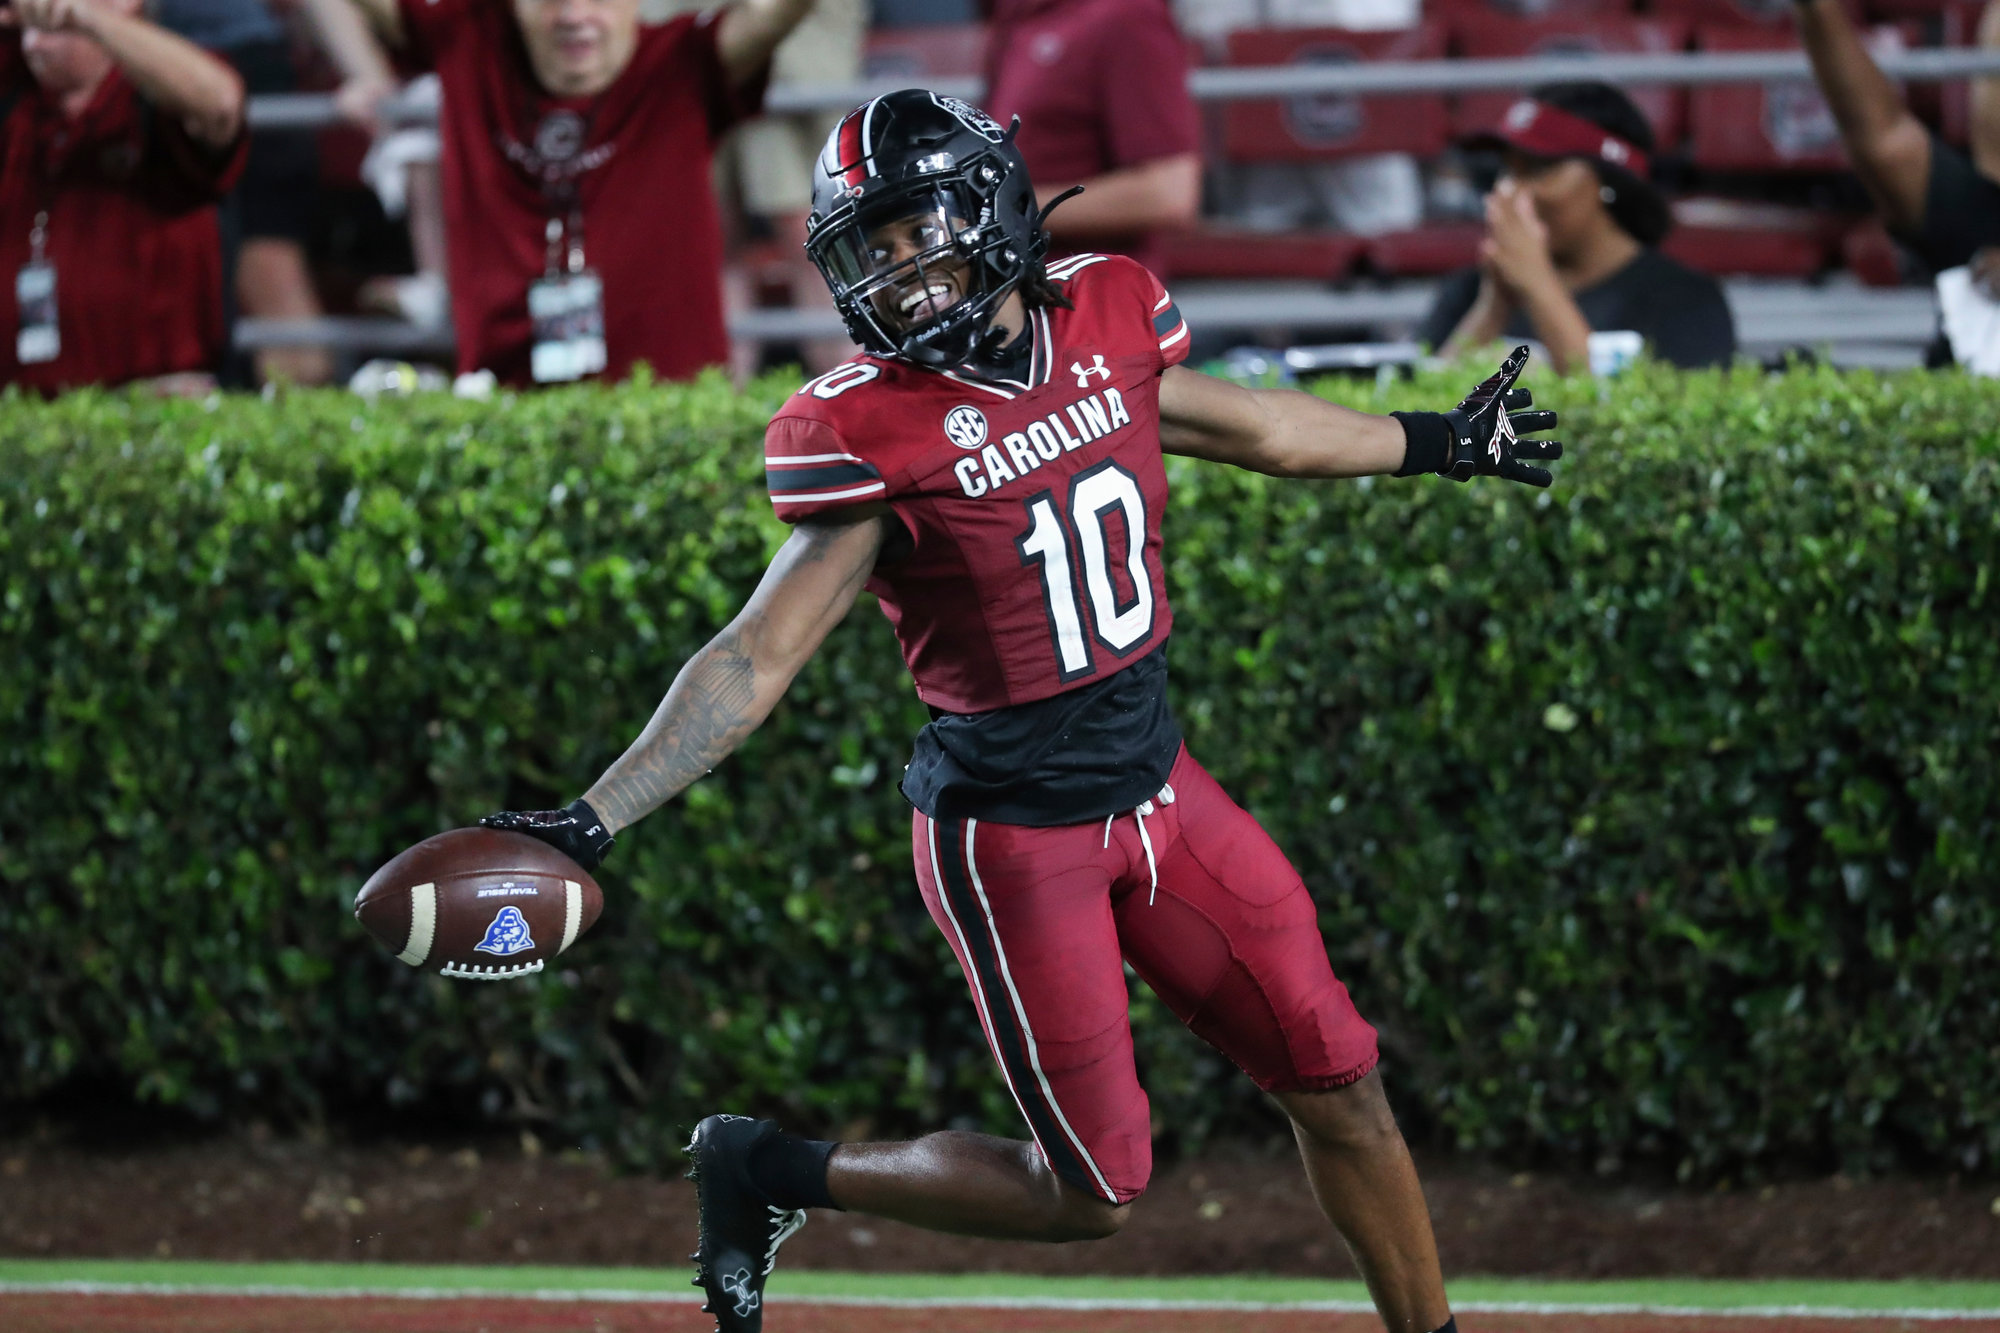 South Carolina wide receiver Ahmarean Brown (10) celebrates after a touchdown against Georgia State on Saturday in Columbia.